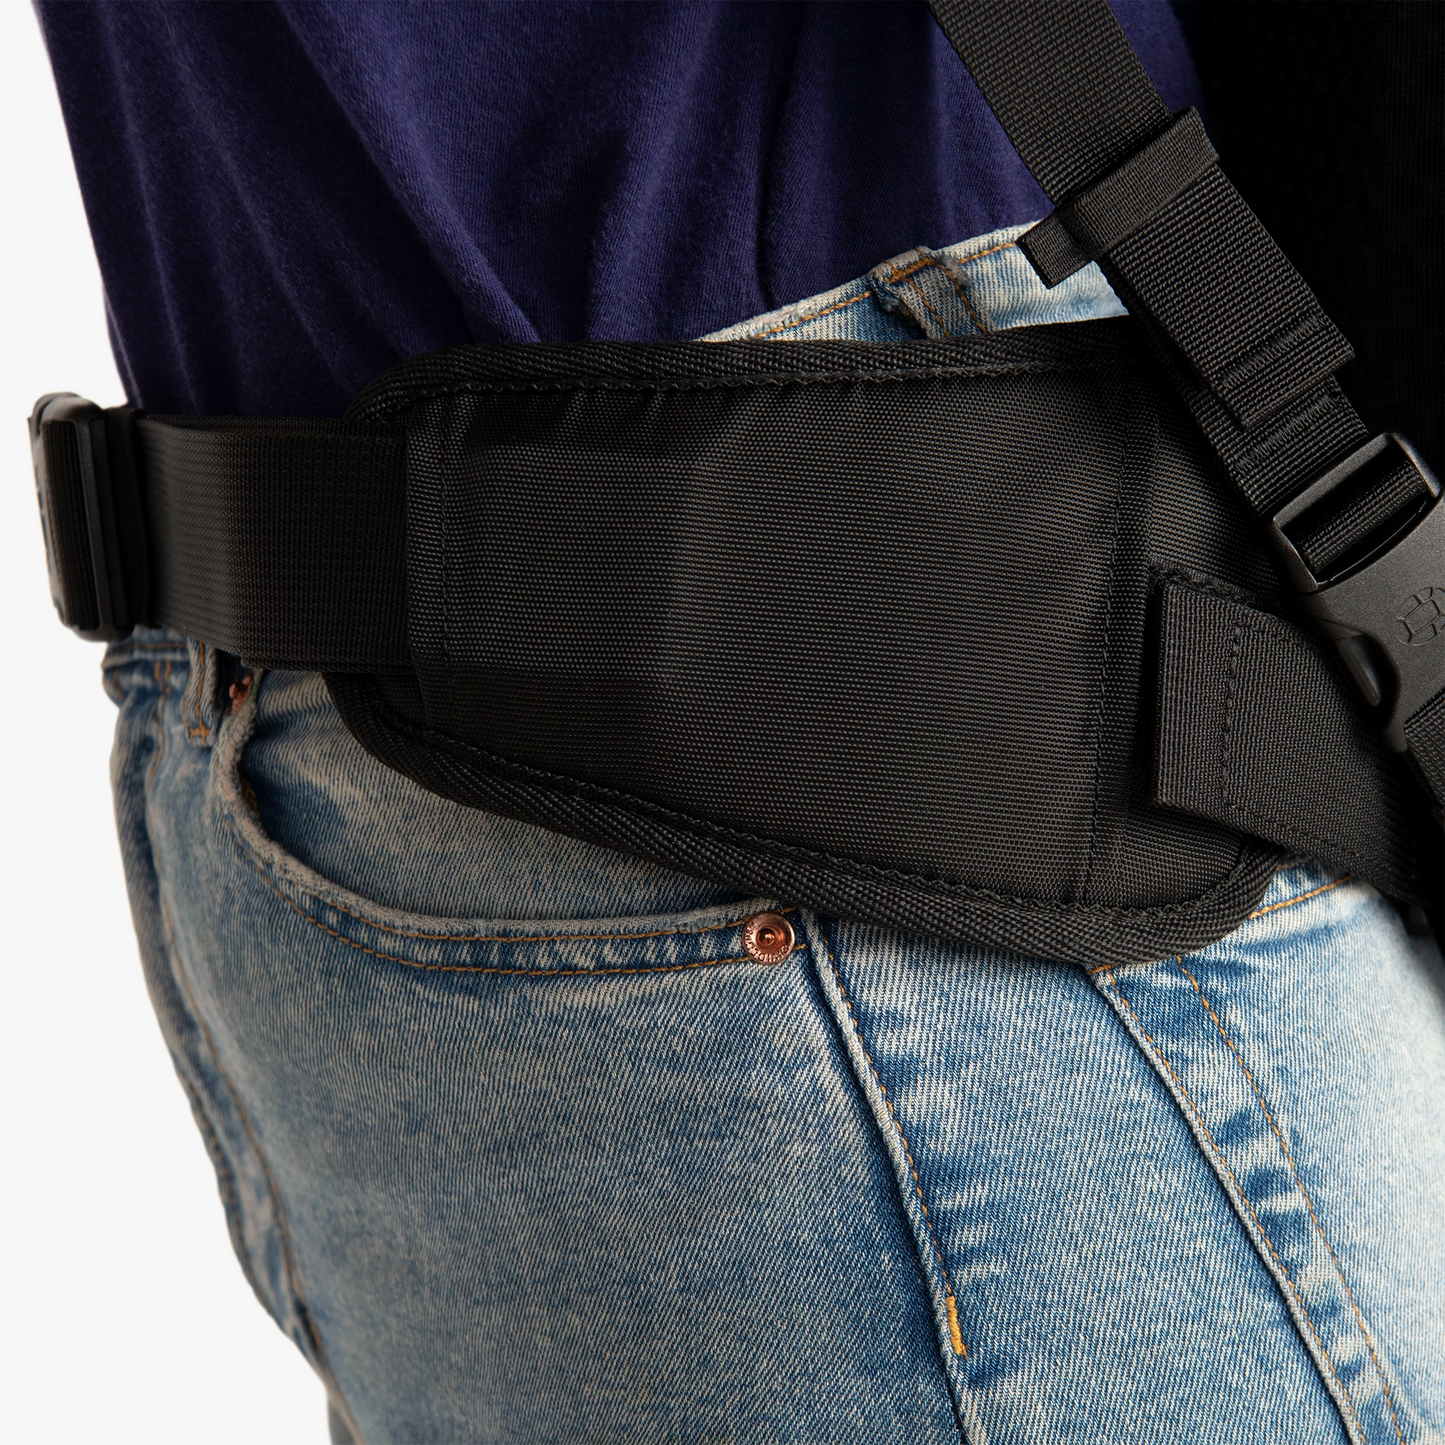 Padded hip belt takes 80% of the weight off your shoulders